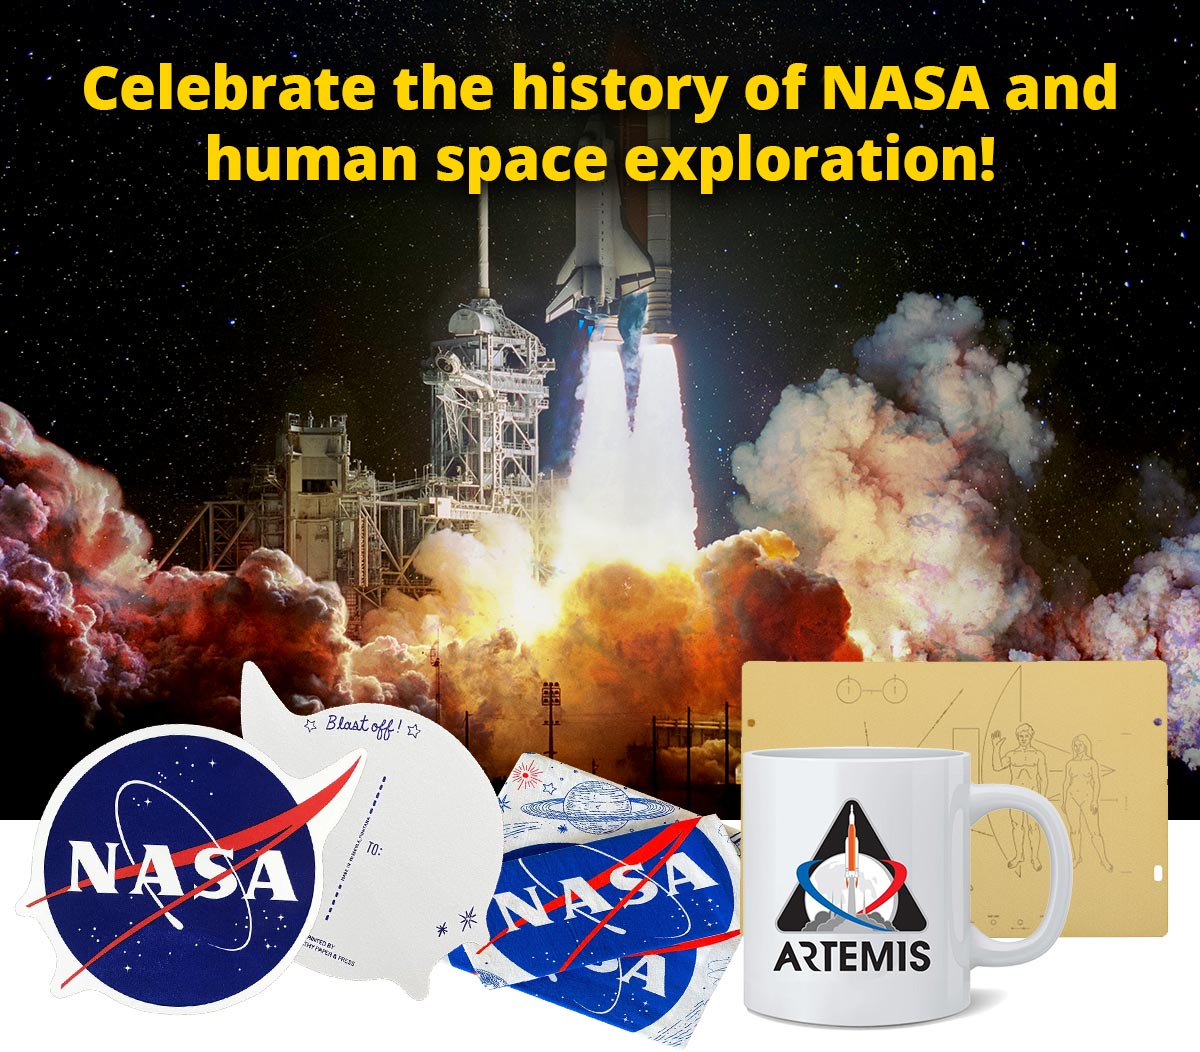 Celebrate the history of NASA and human space exploration!